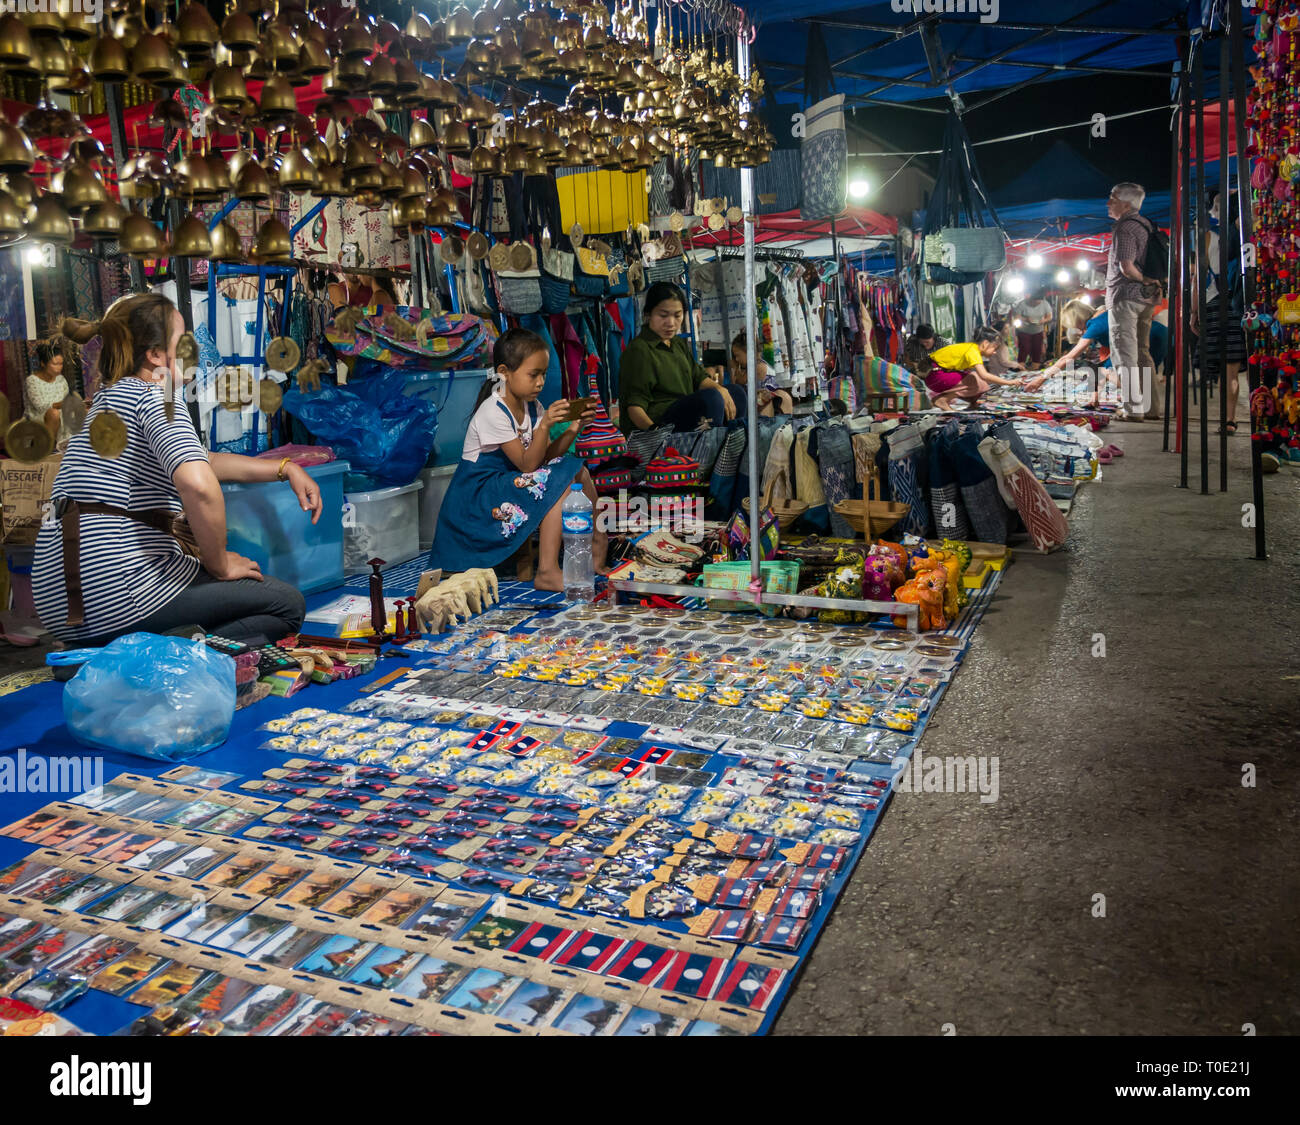 Tourist souvenirs for sale at night market with stall holders, Luang Prabang, Laos, SE Asia Stock Photo